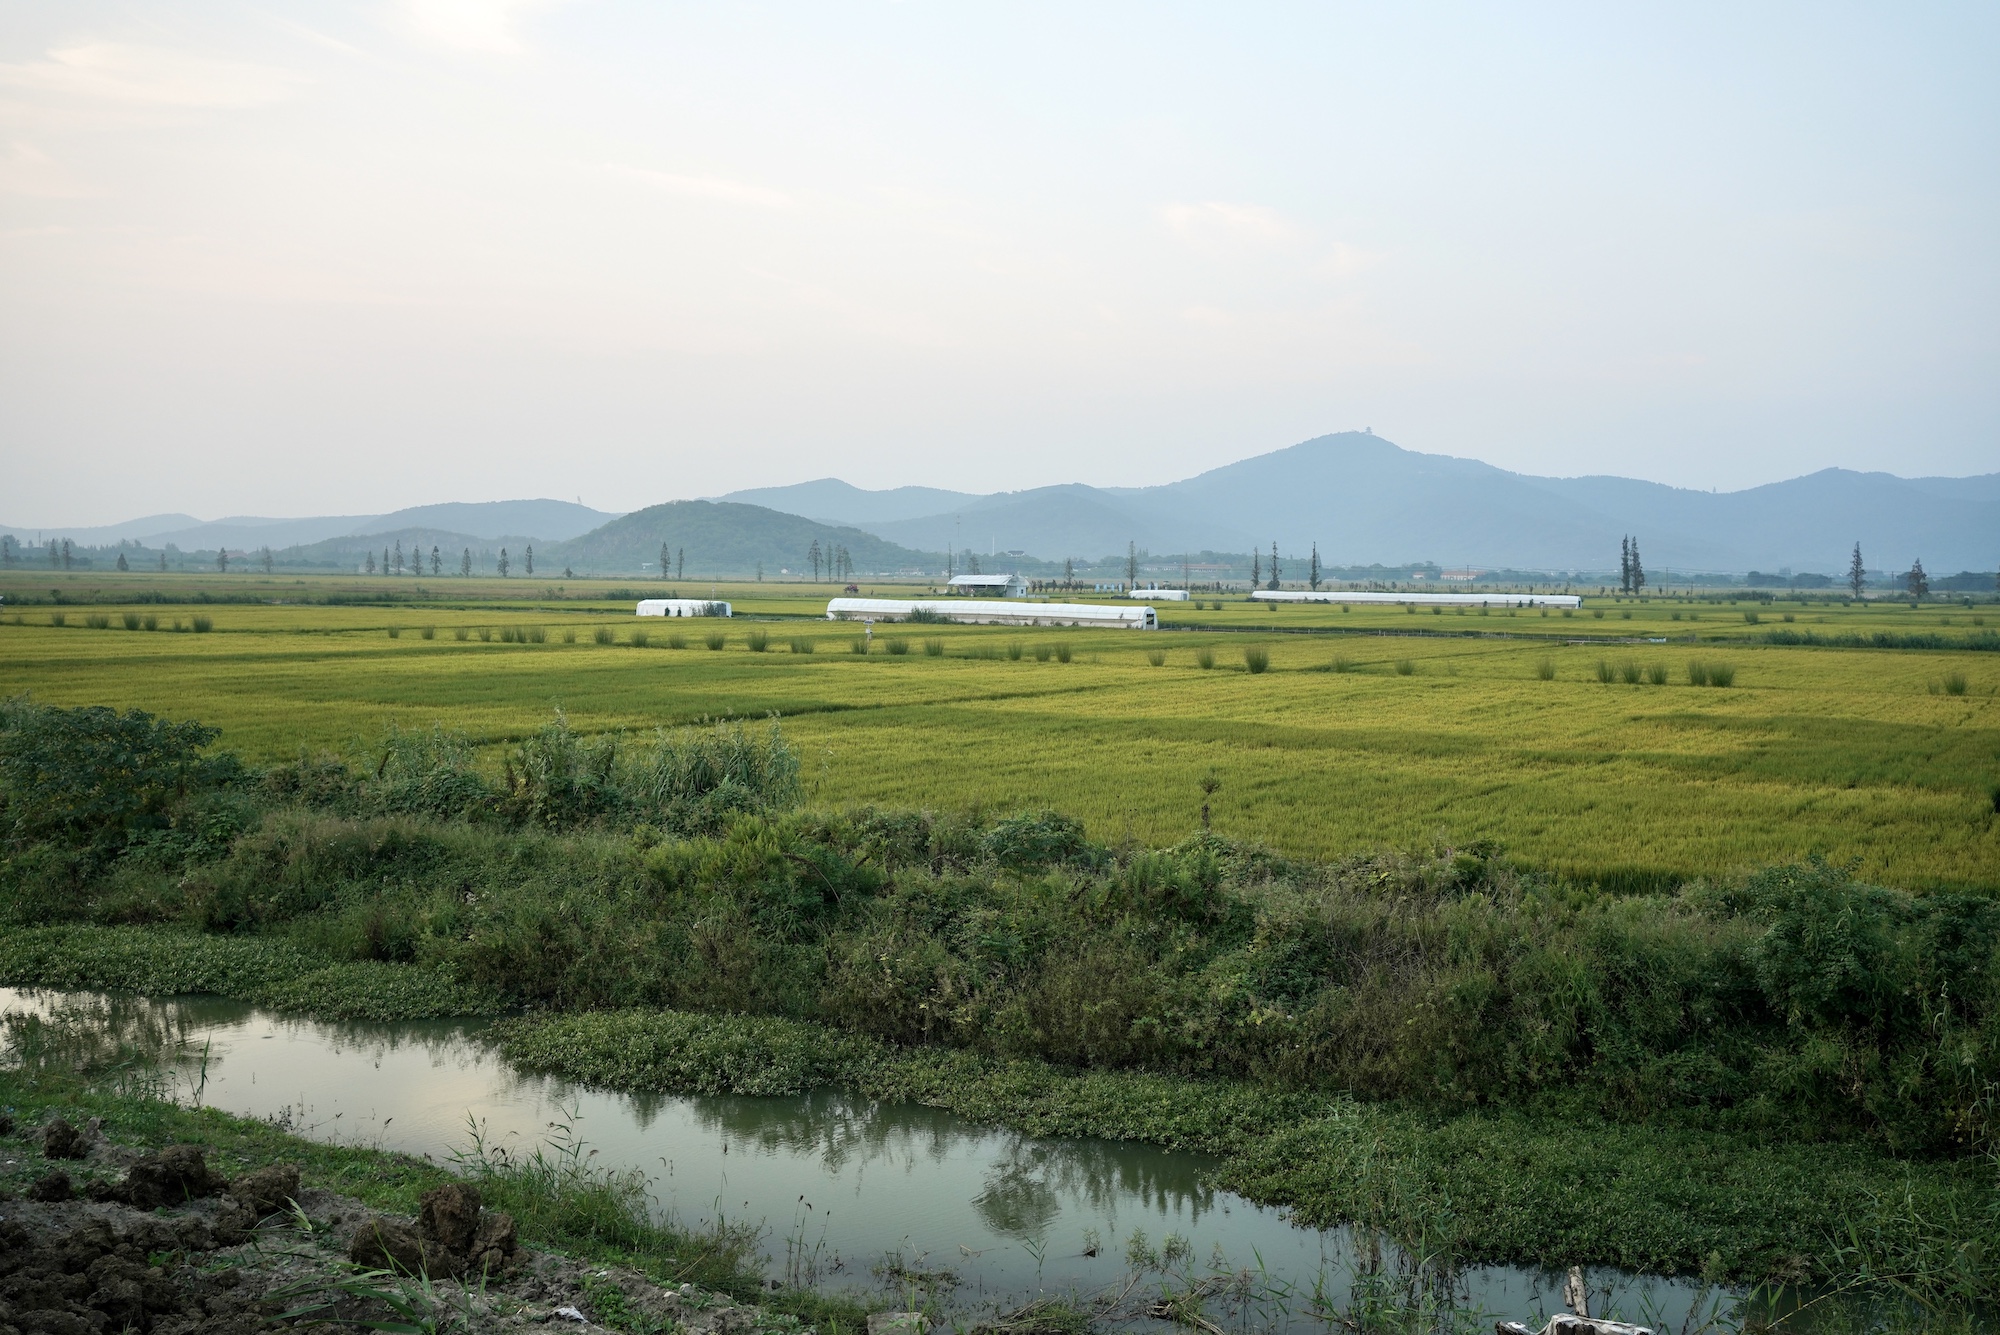 Why are polders an important part of China’s water heritage